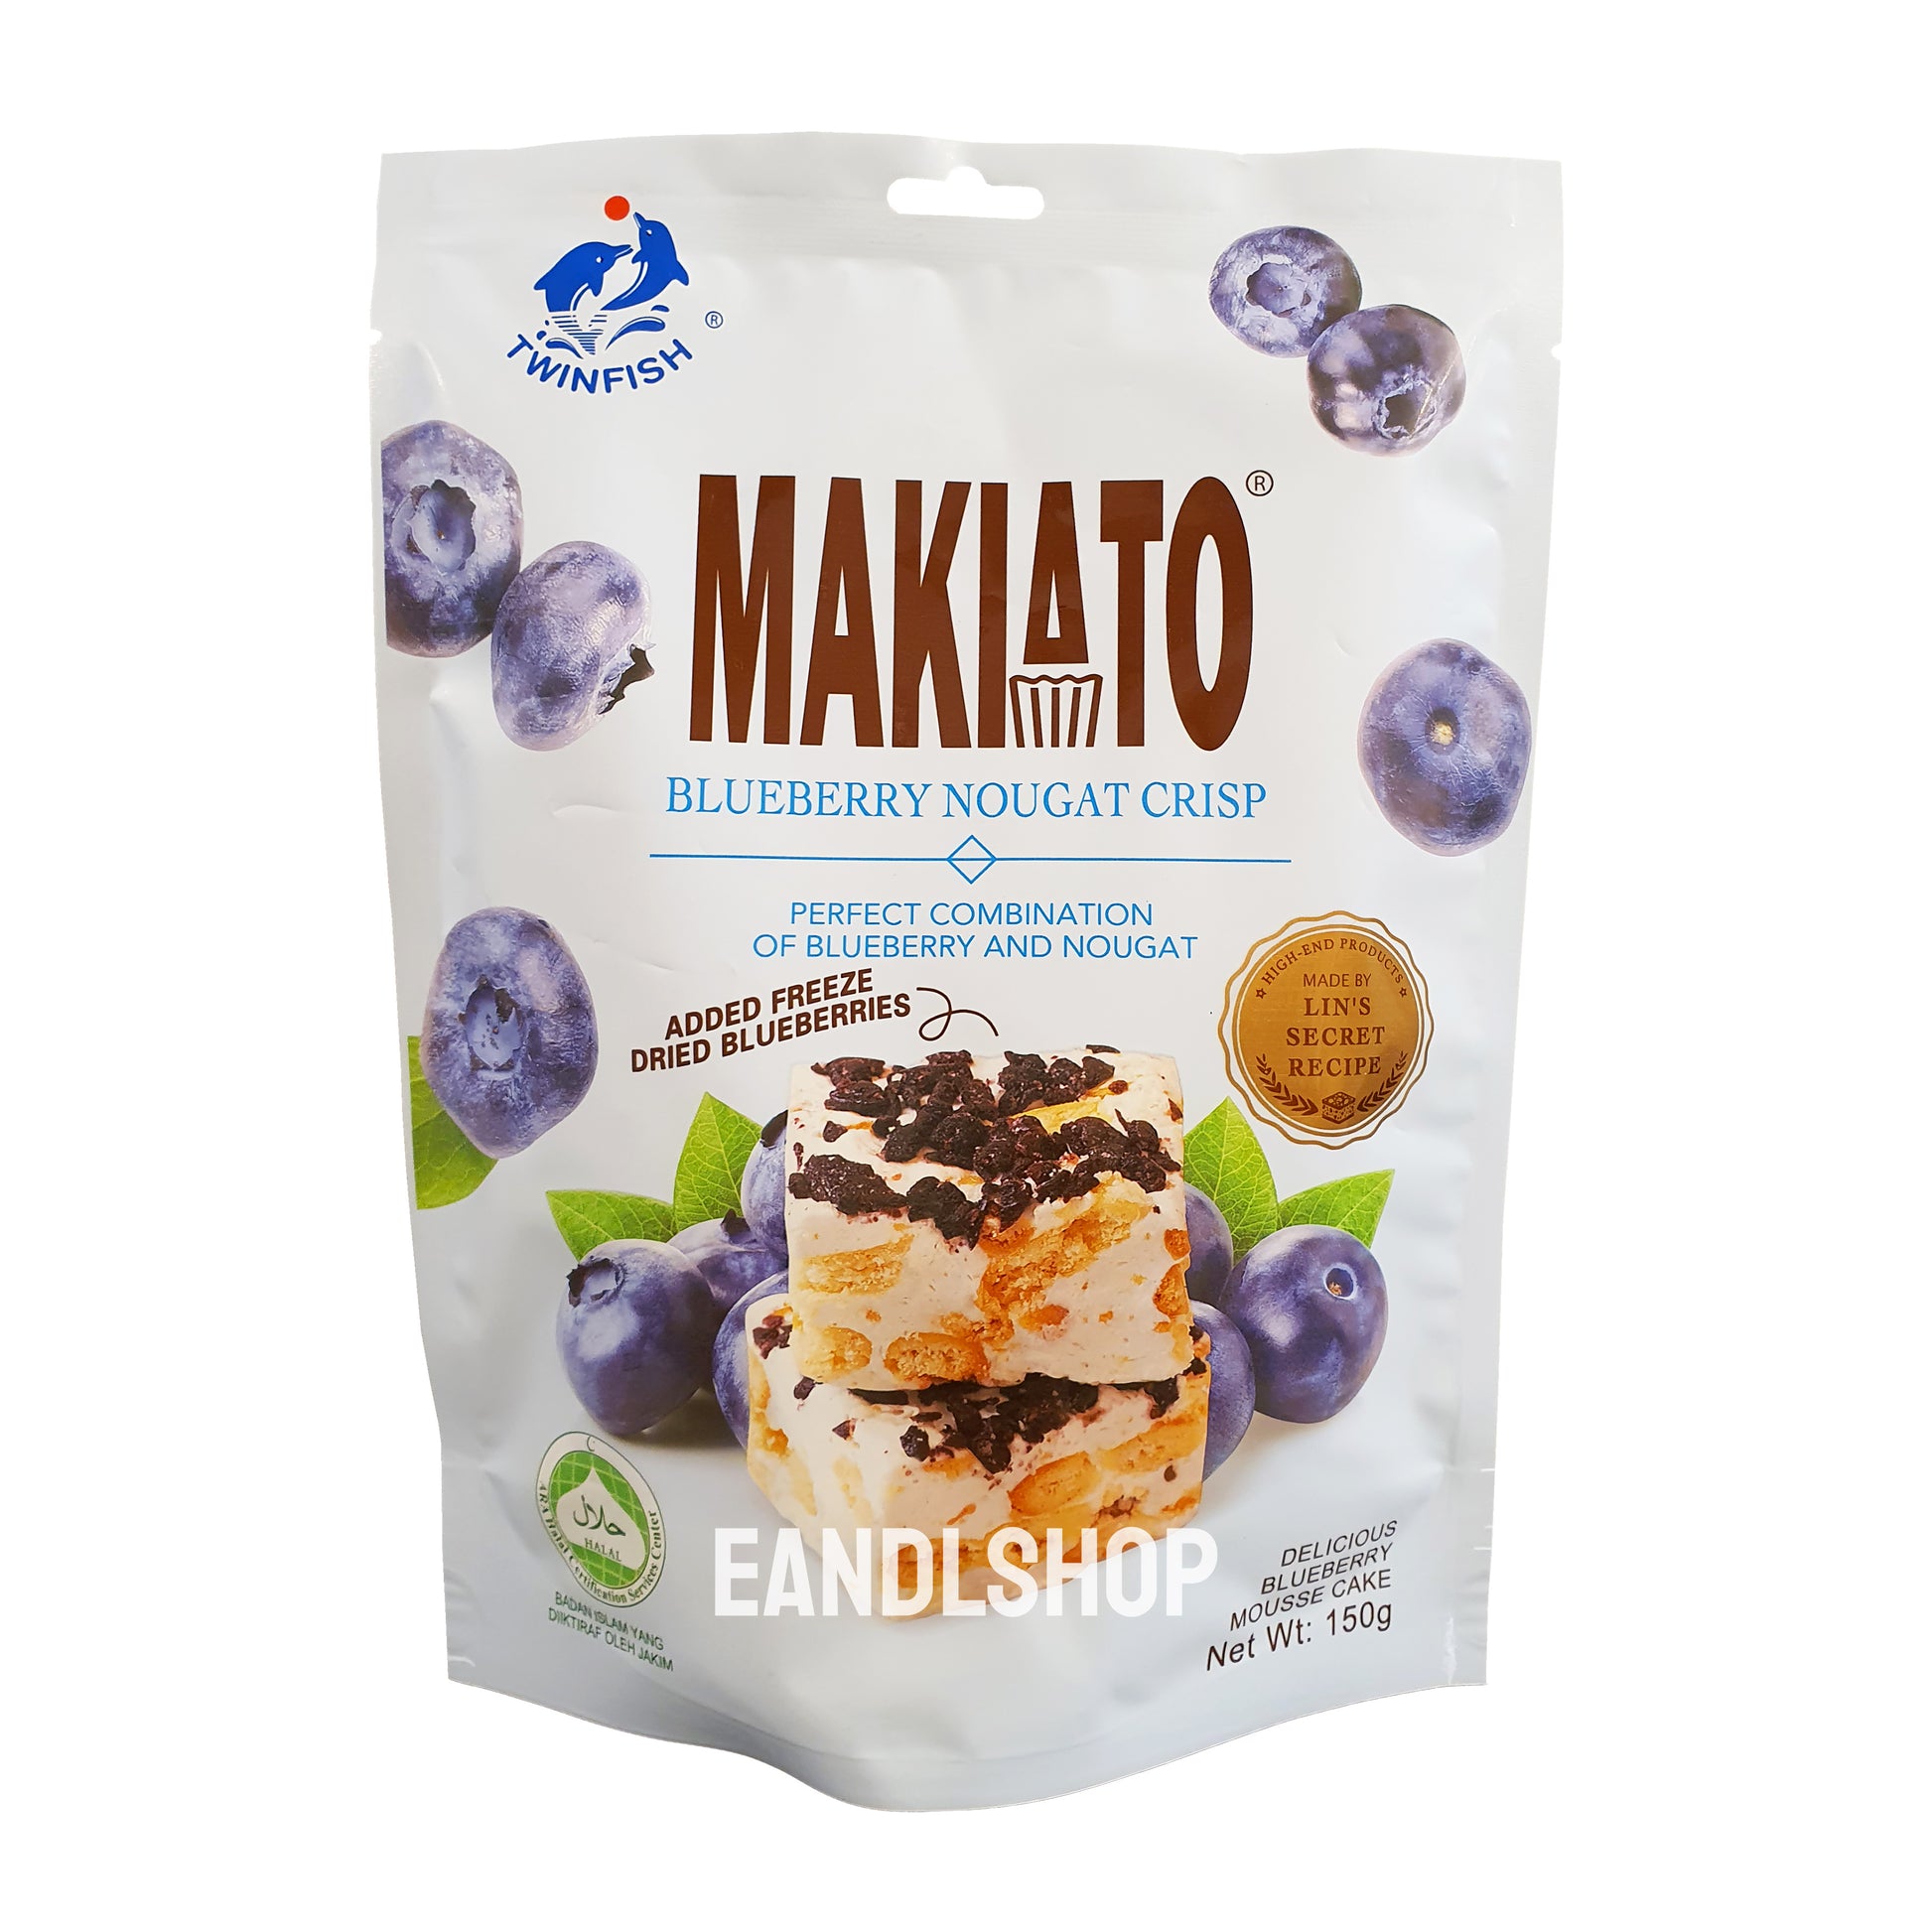 Makiato Blueberry Nougat Crisp. Old-school biscuits, modern snacks (chips, crackers), cakes, gummies, plums, dried fruits, nuts, herbal tea – available at www.EANDLSHOP.com